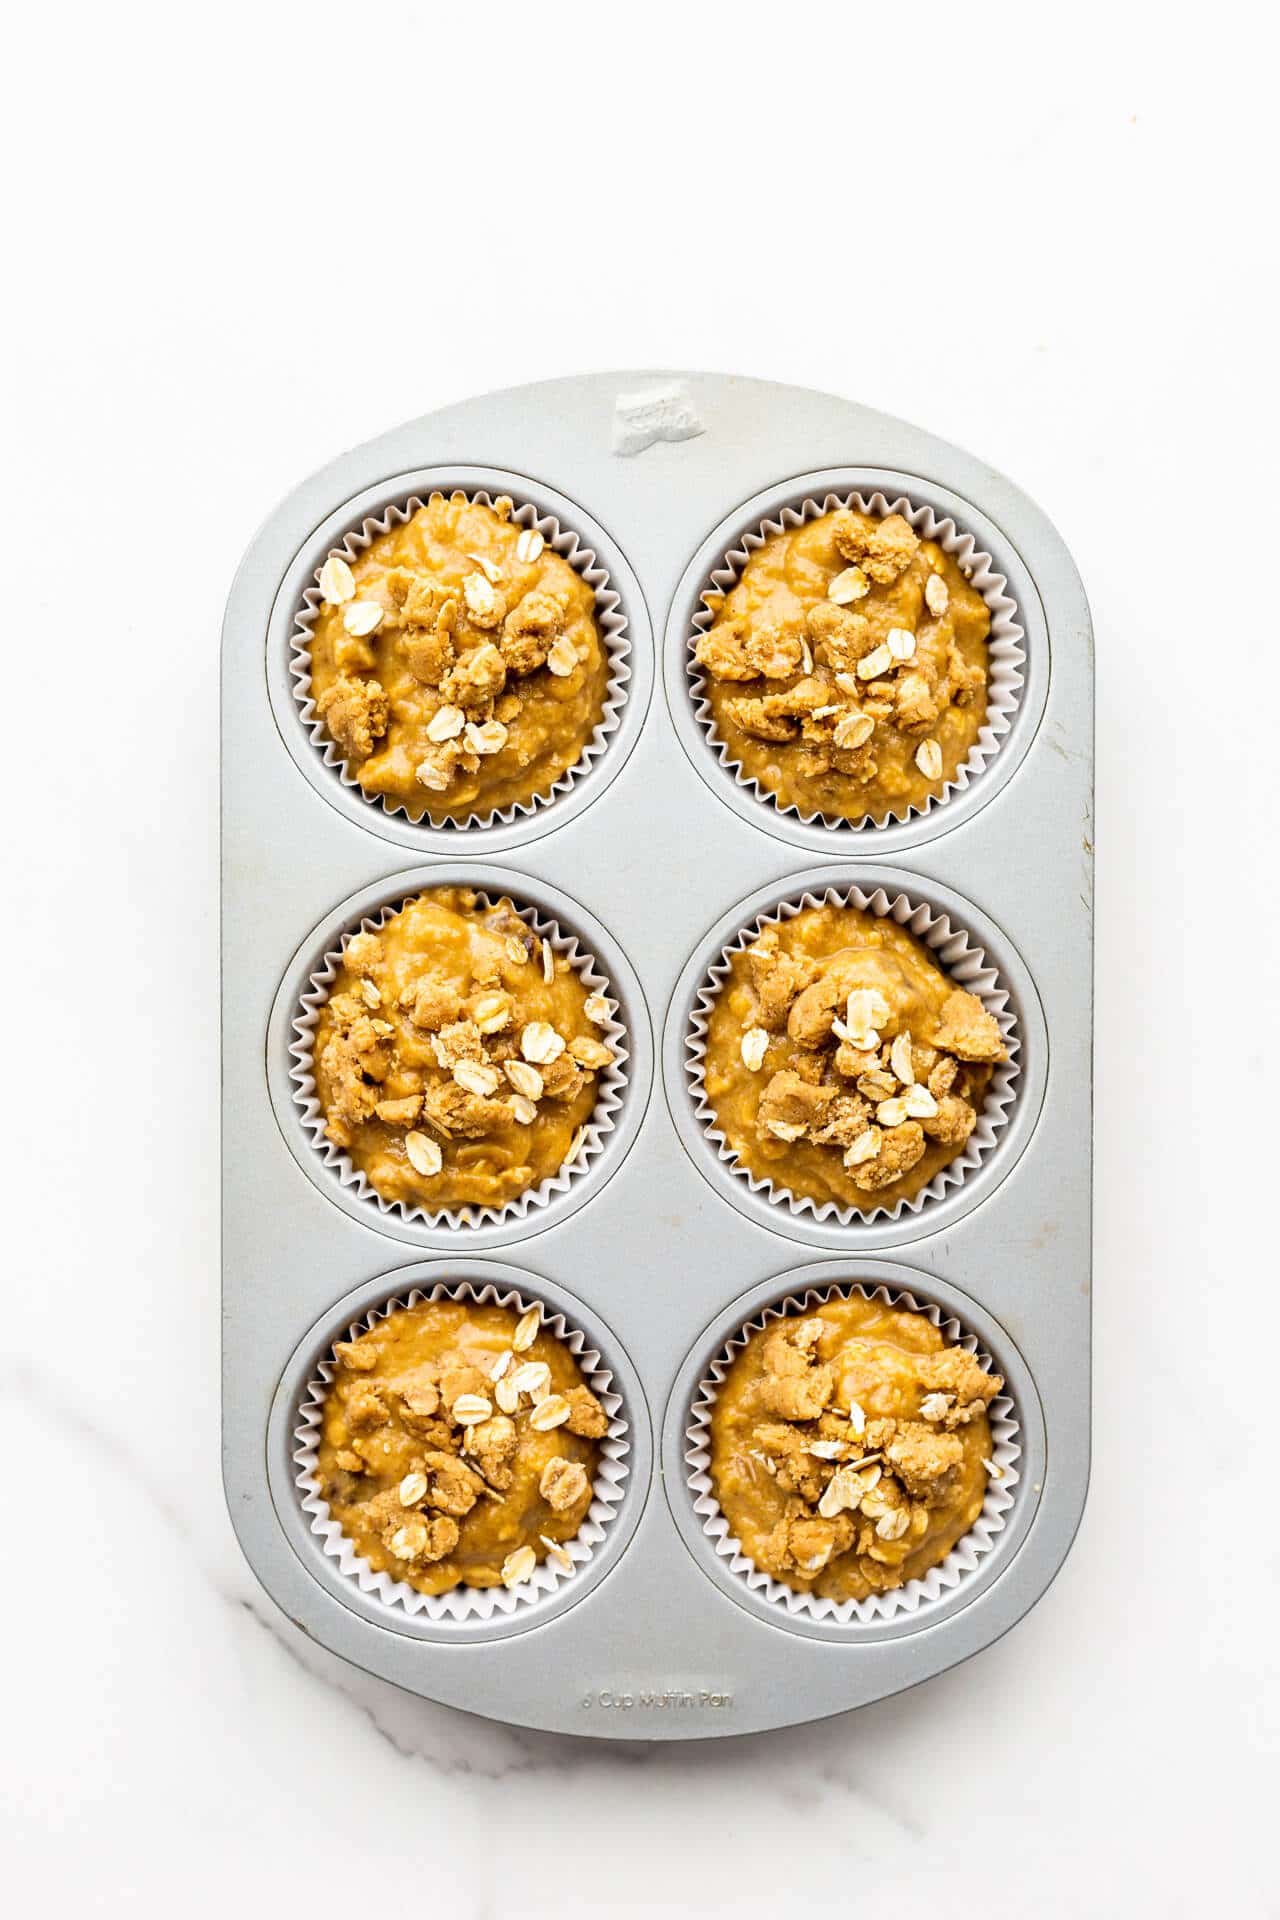 Banana muffins topped with oats ready to be baked in a muffin pan.